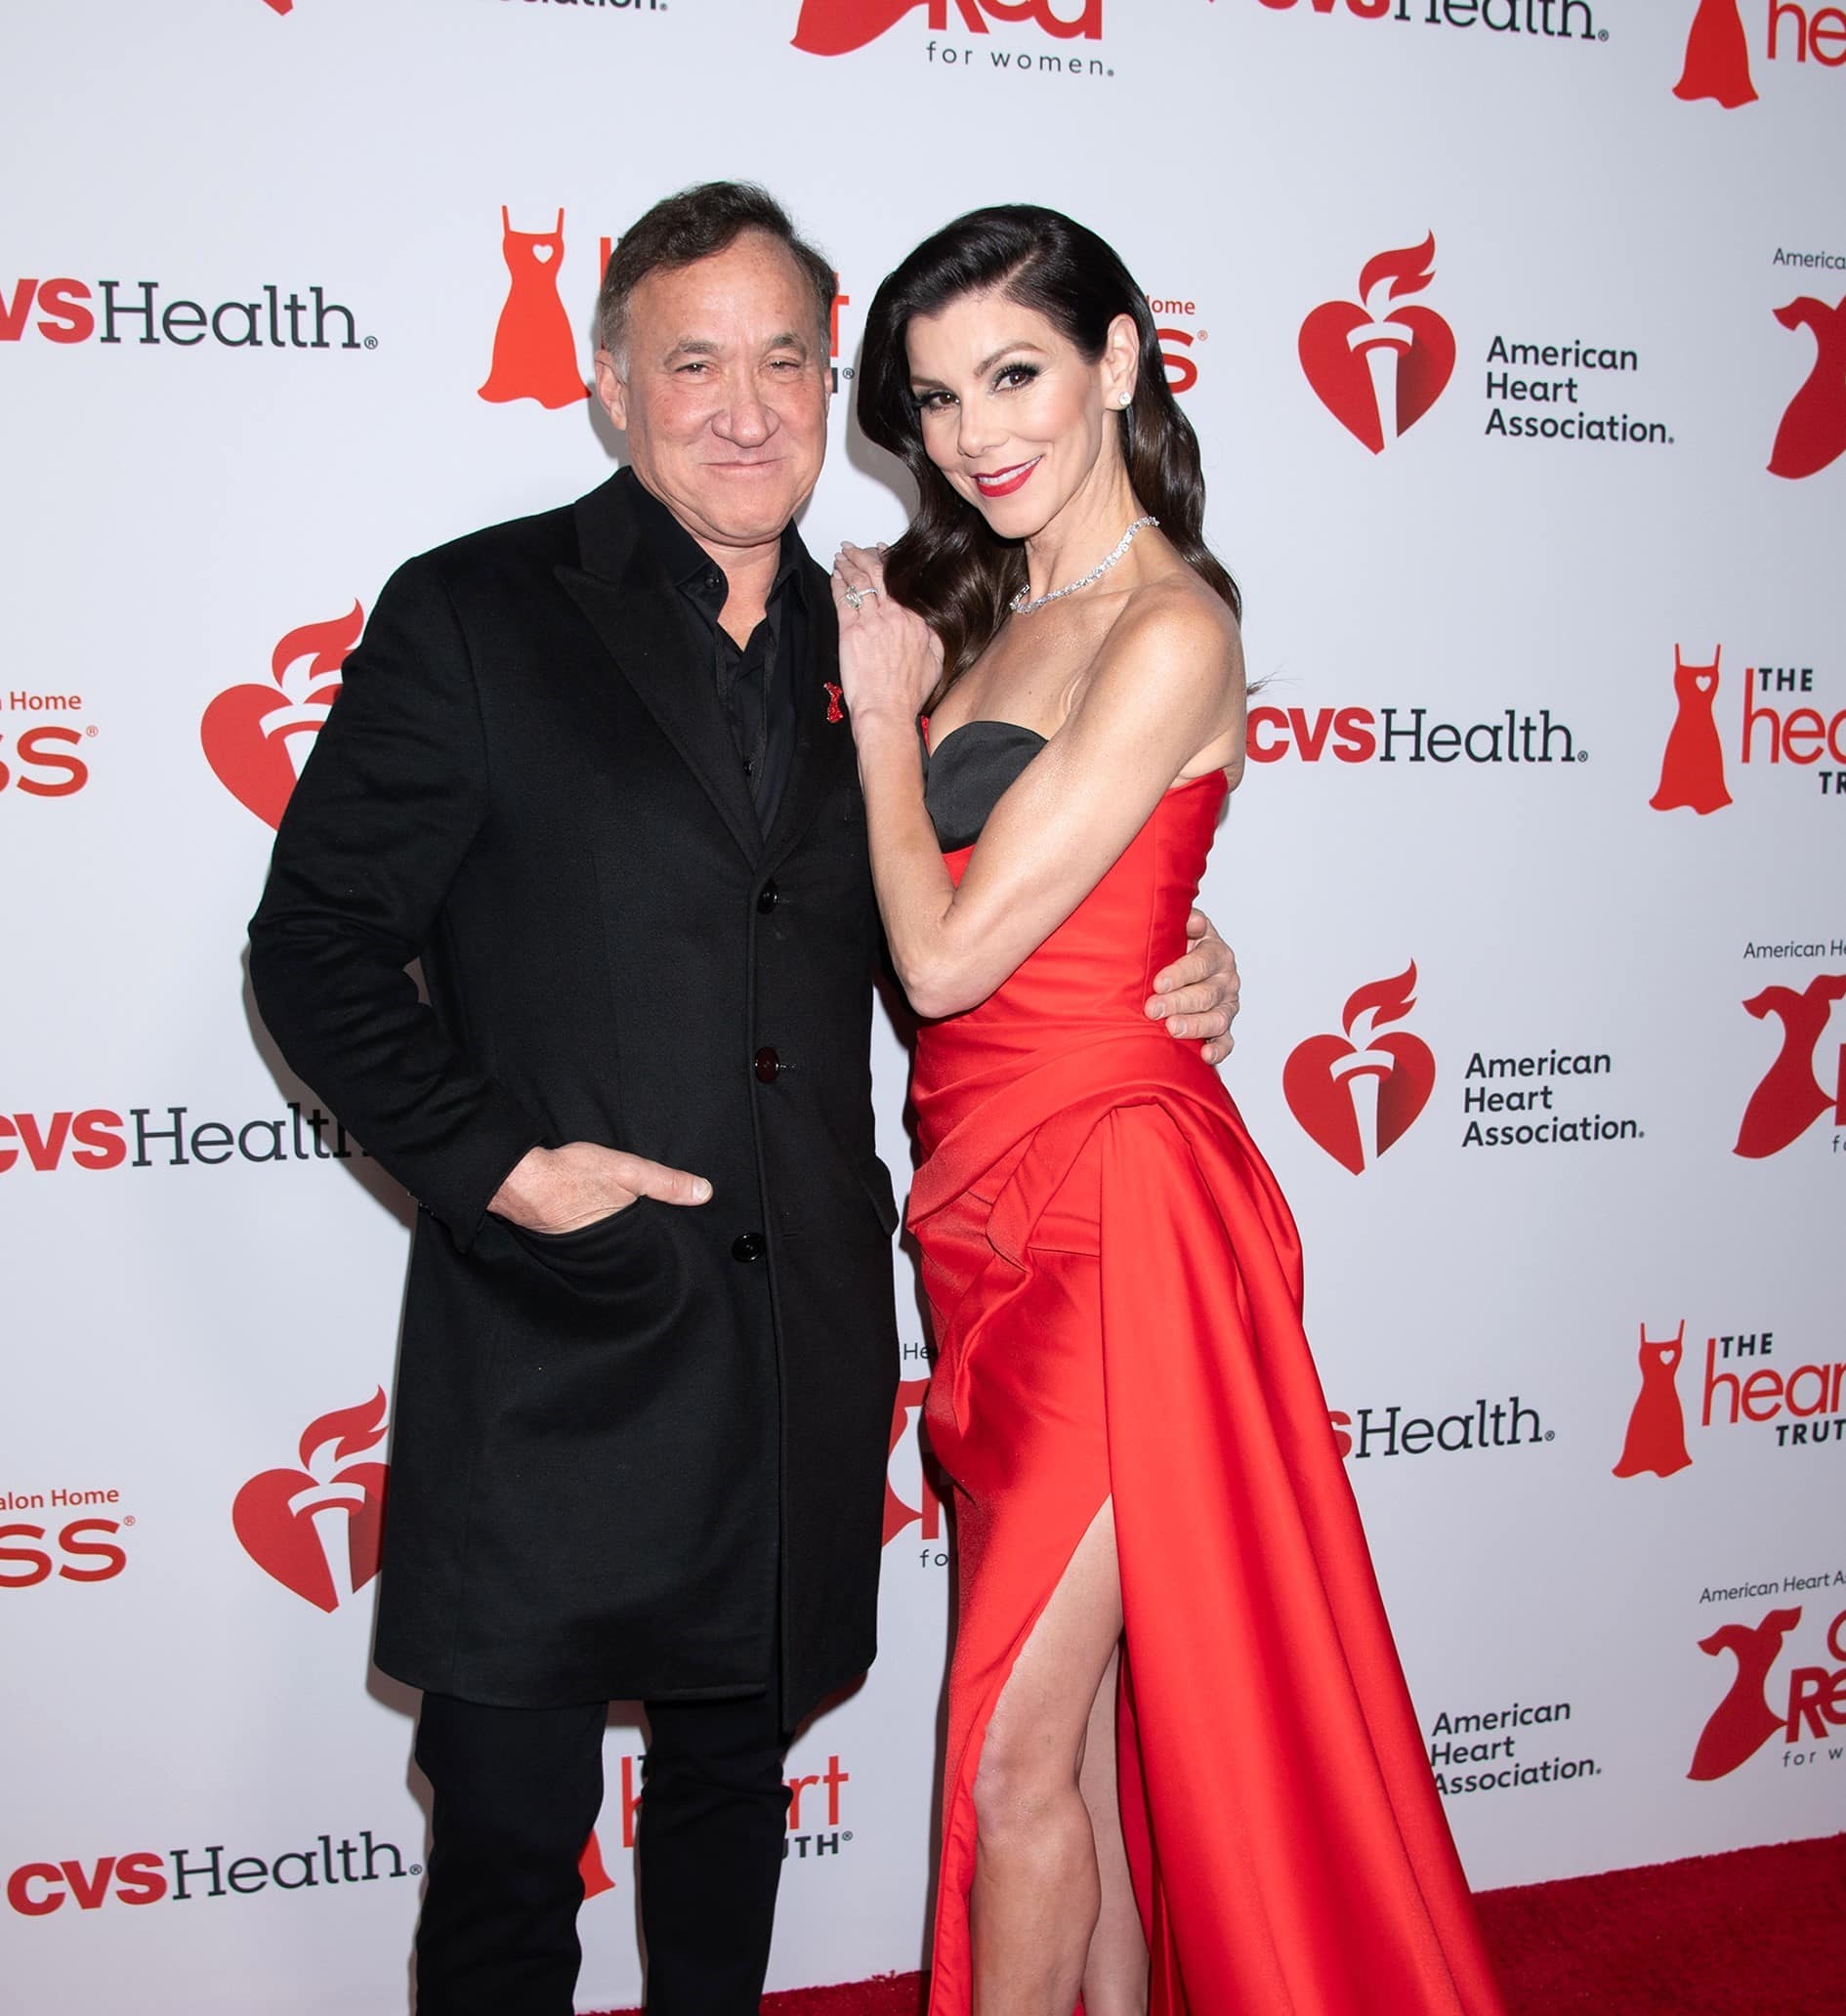 Heather and Terry Dubrow Tease the Upcoming RHOC Season, Say 'Truth is Stranger than Fiction' ahead of Alexis' Return